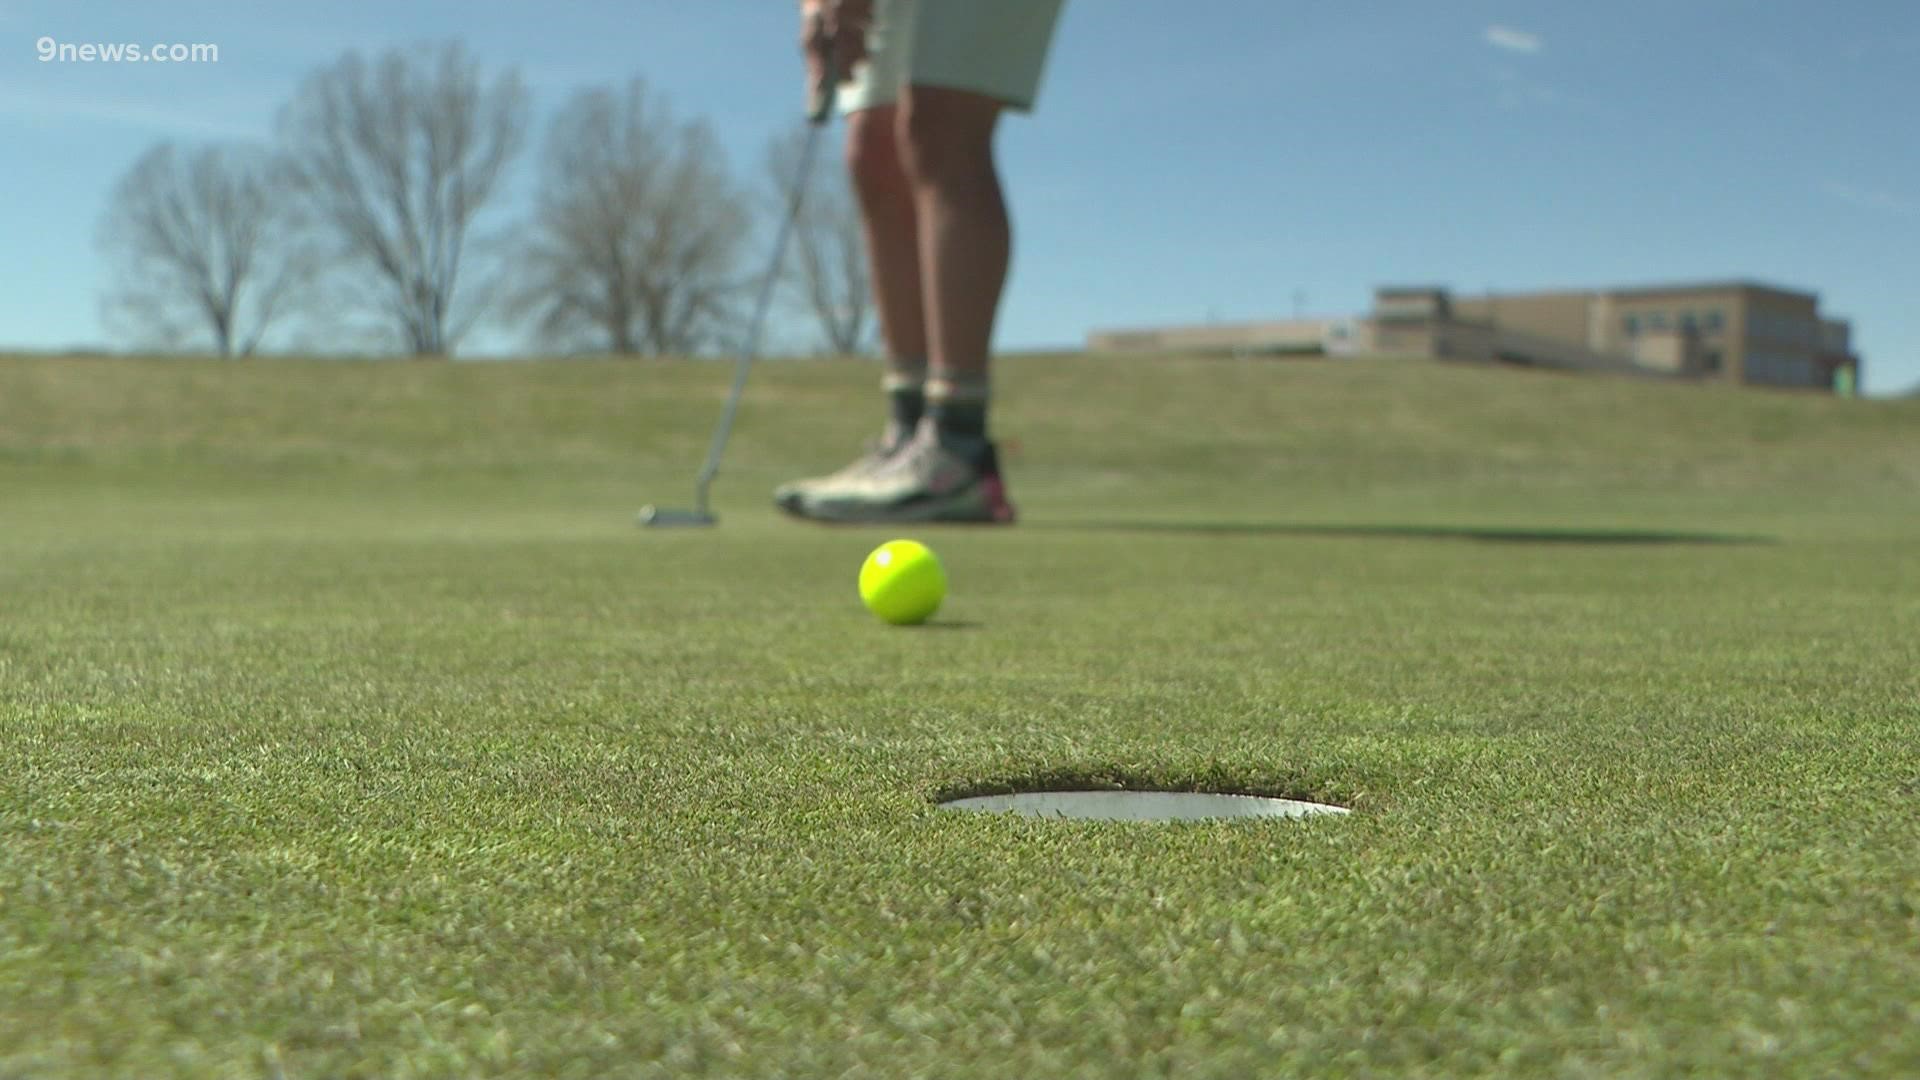 Coal Creek Golf Course was closed for weeks after the Marshall Fire burned alongside it. This weekend, the course reopened all 18 holes.